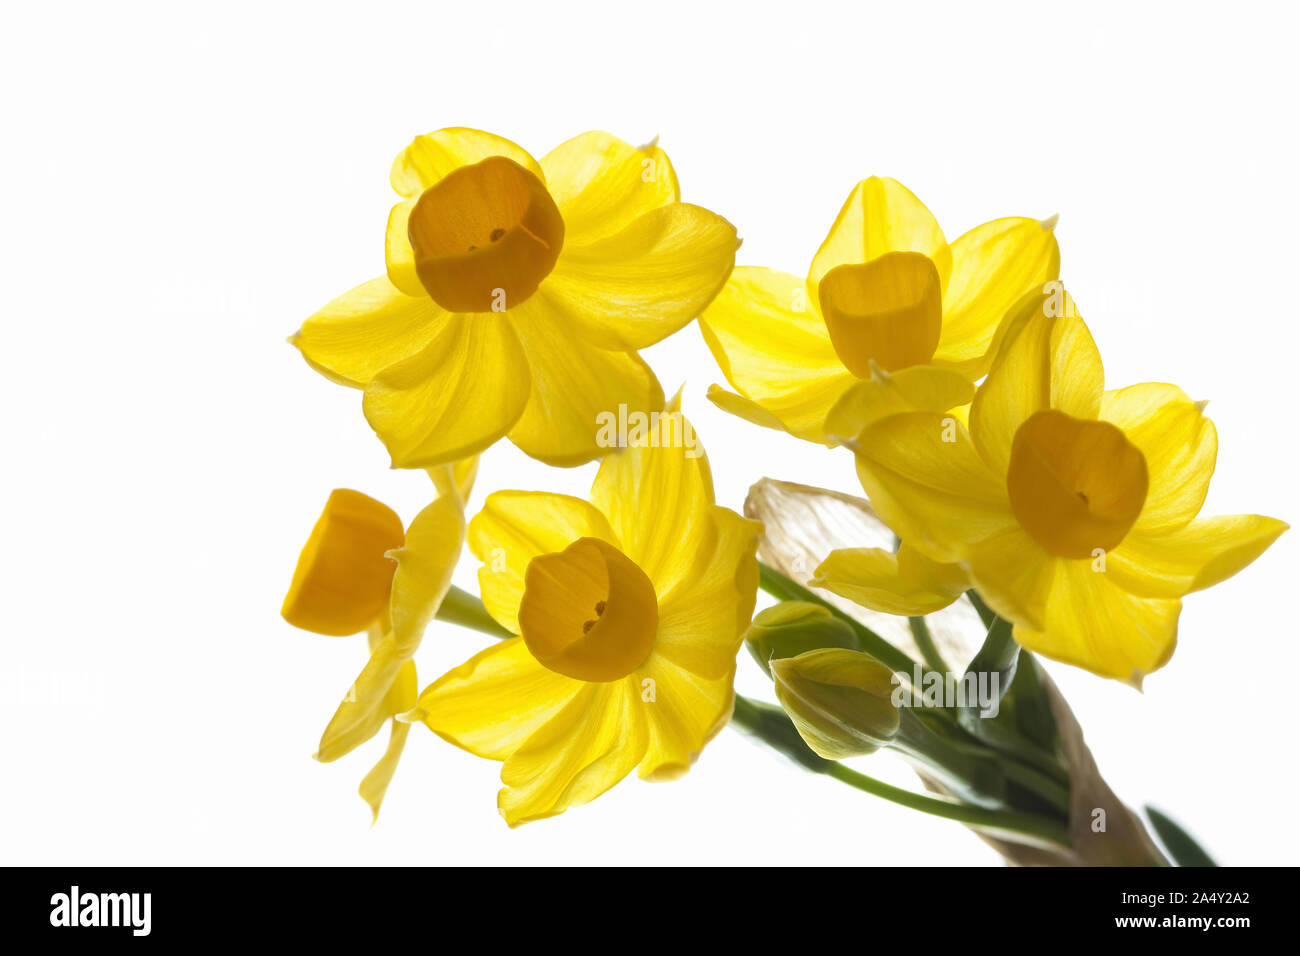 Yellow narcissus on white background Stock Photo